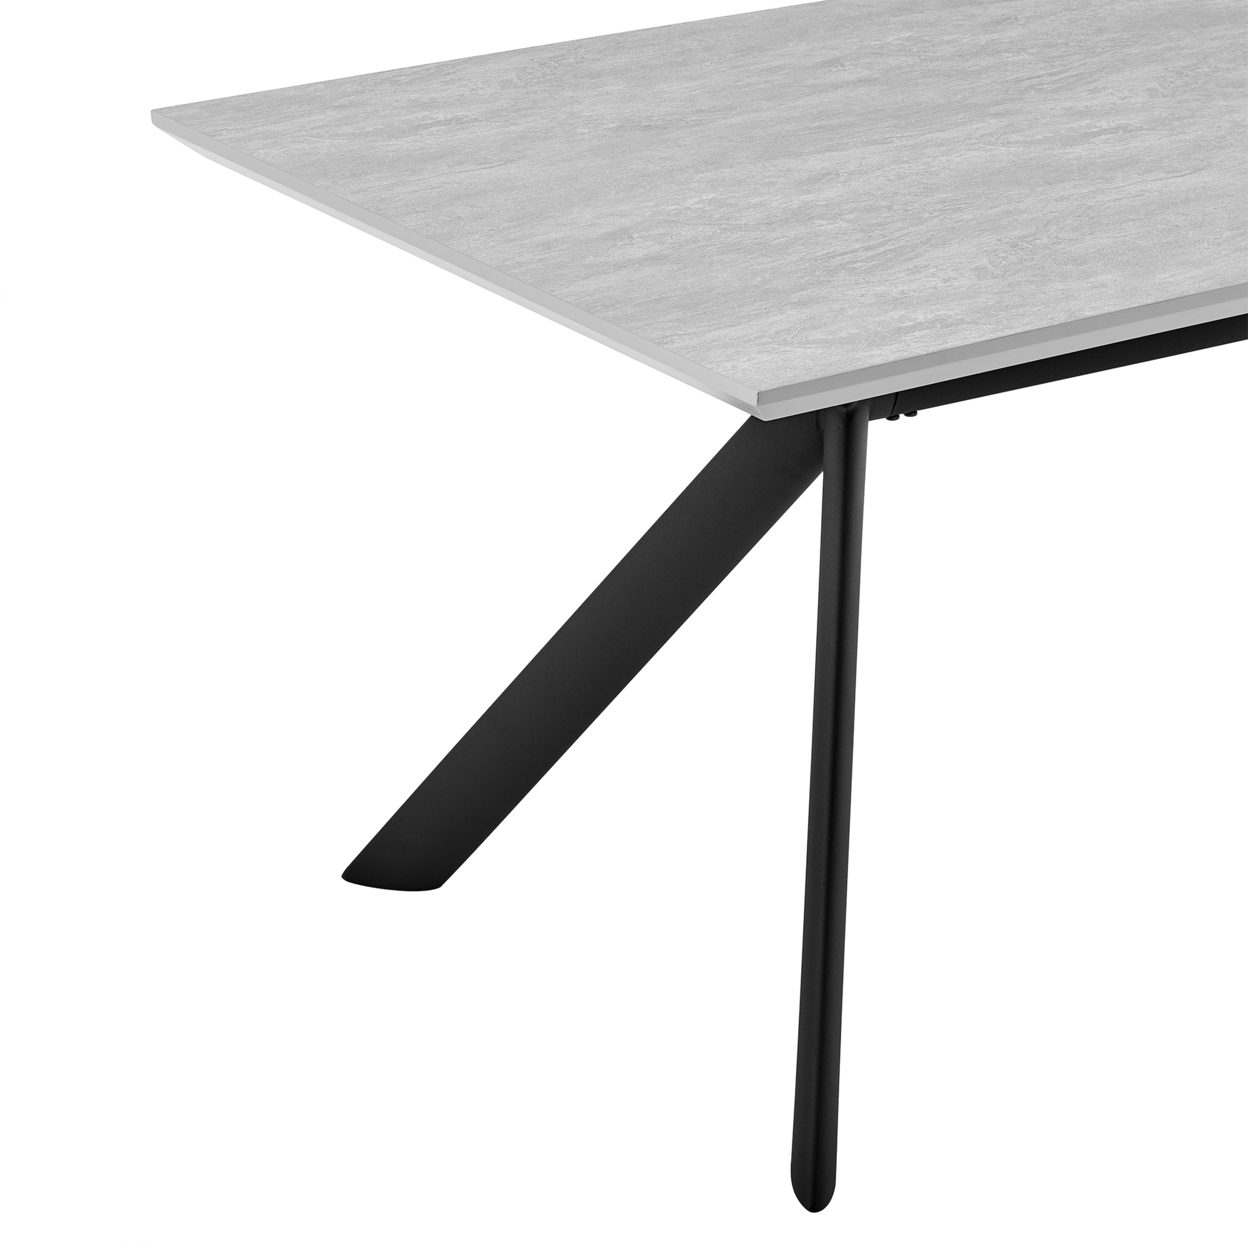 Dining Table With Melamine Top And Angled Metal Base, Light Gray And Black- Saltoro Sherpi